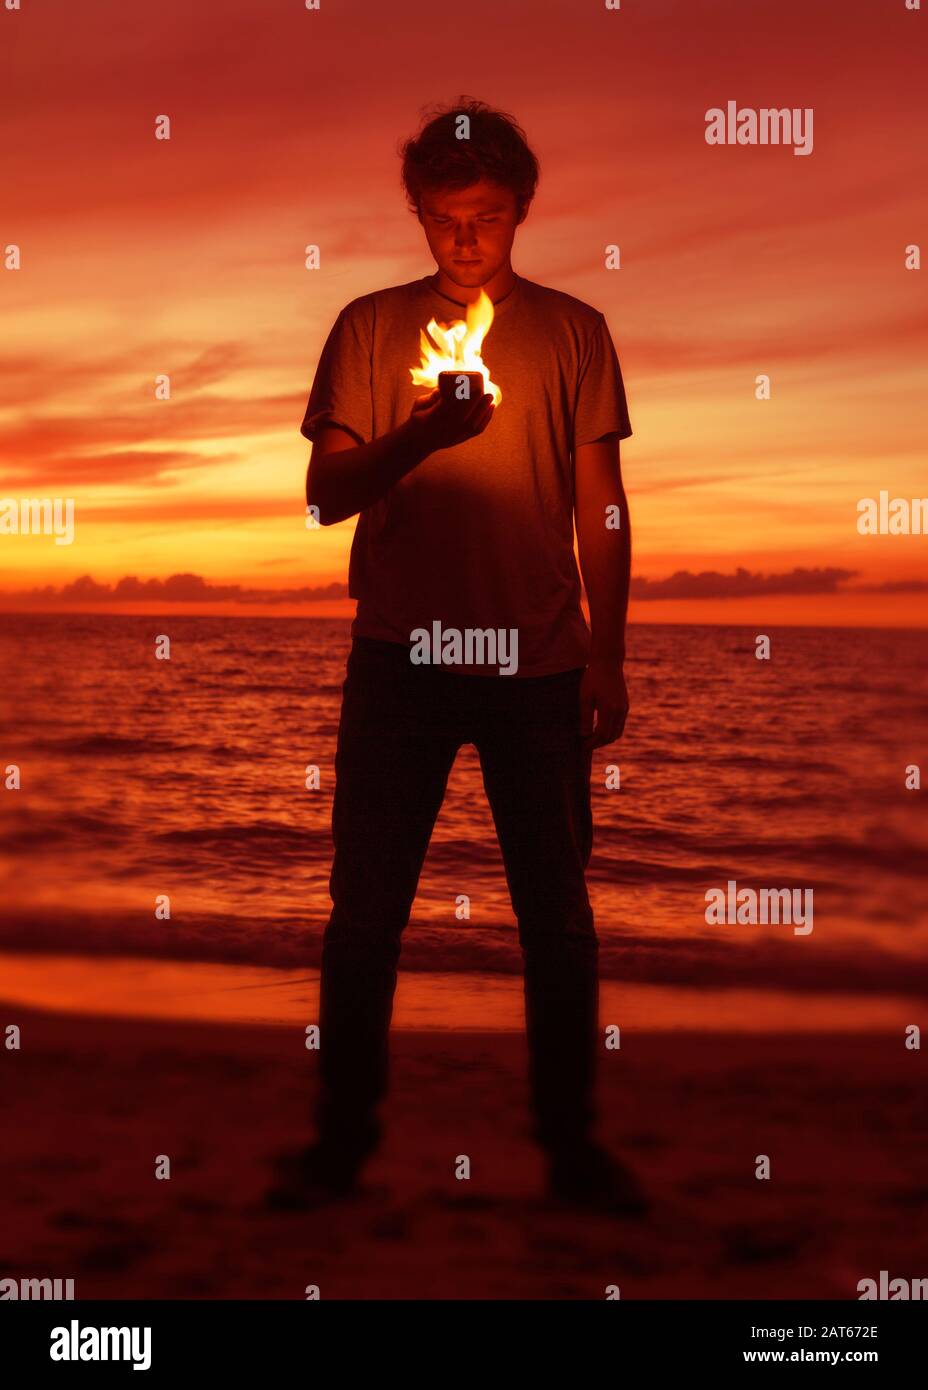 A young man stands on a beach at sunset and looks at his burning smart phone as flames illuminate his face Stock Photo